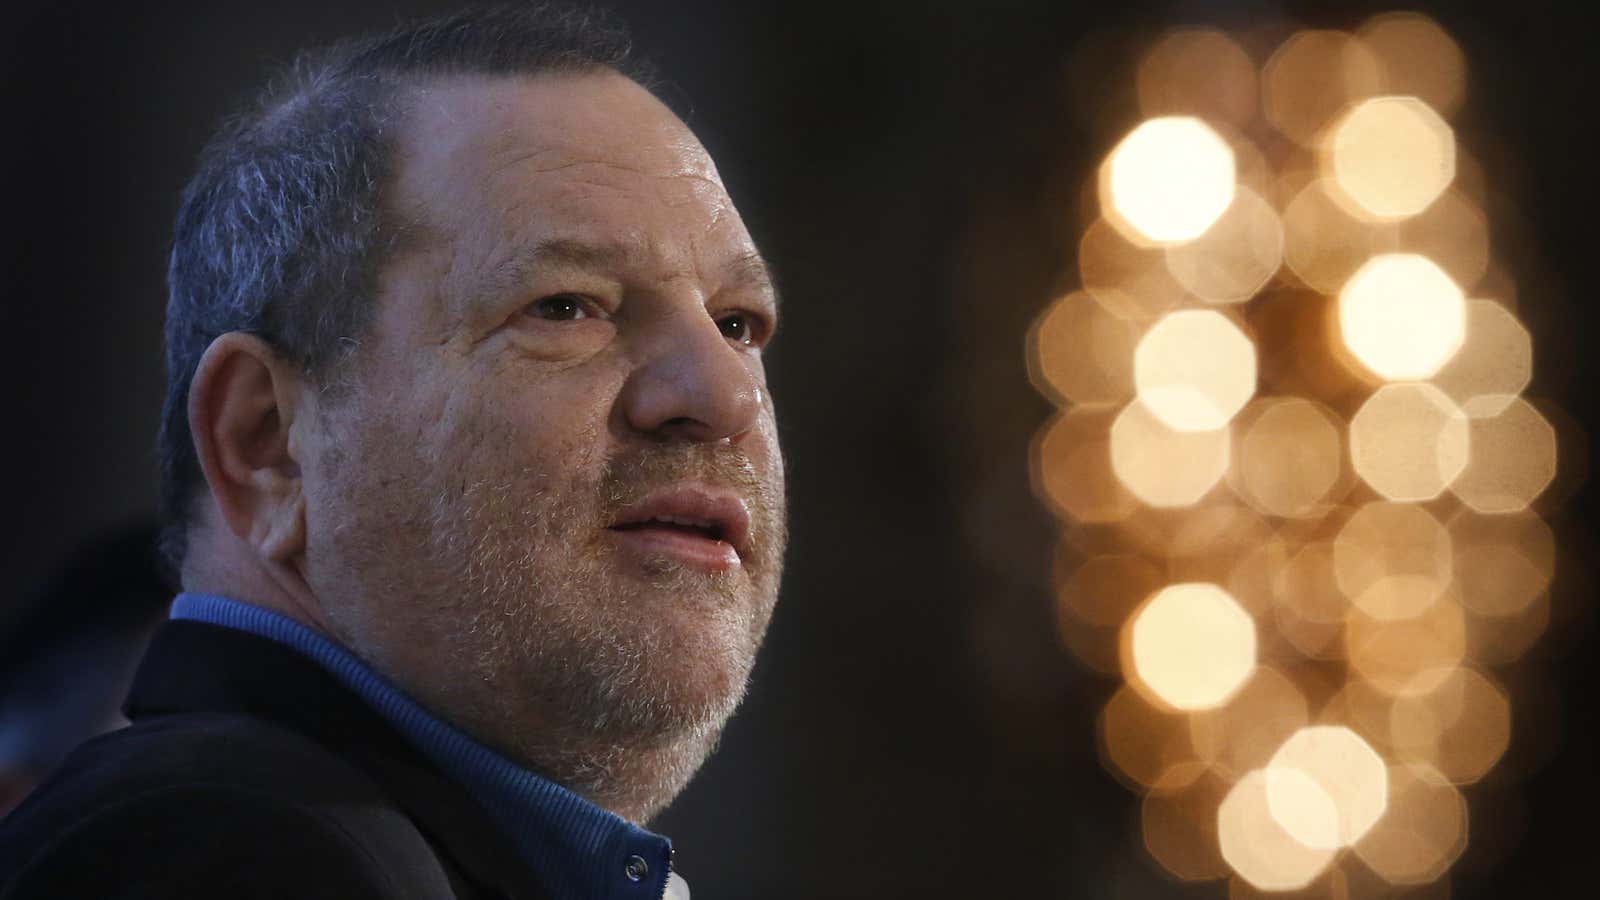 “Now you’re embarrassing me,” Weinstein is heard telling the 22-year-old on the tape.